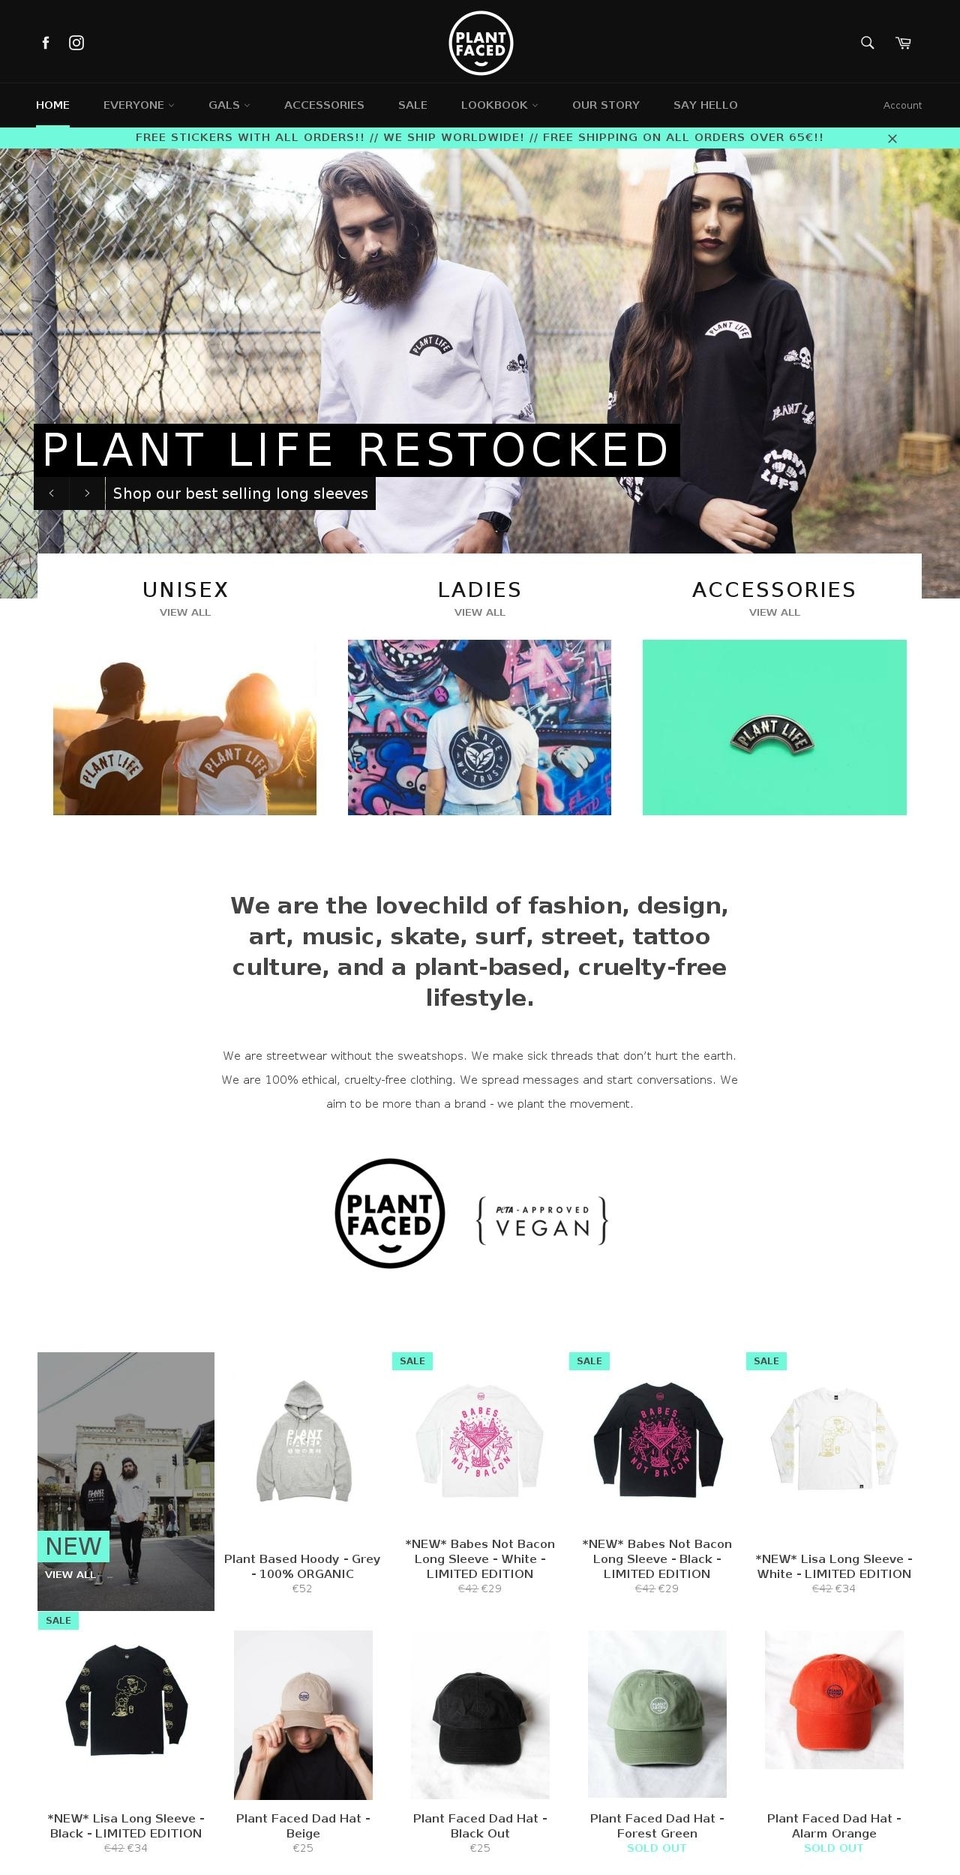 Reformation Shopify theme site example plantfacedclothing.com